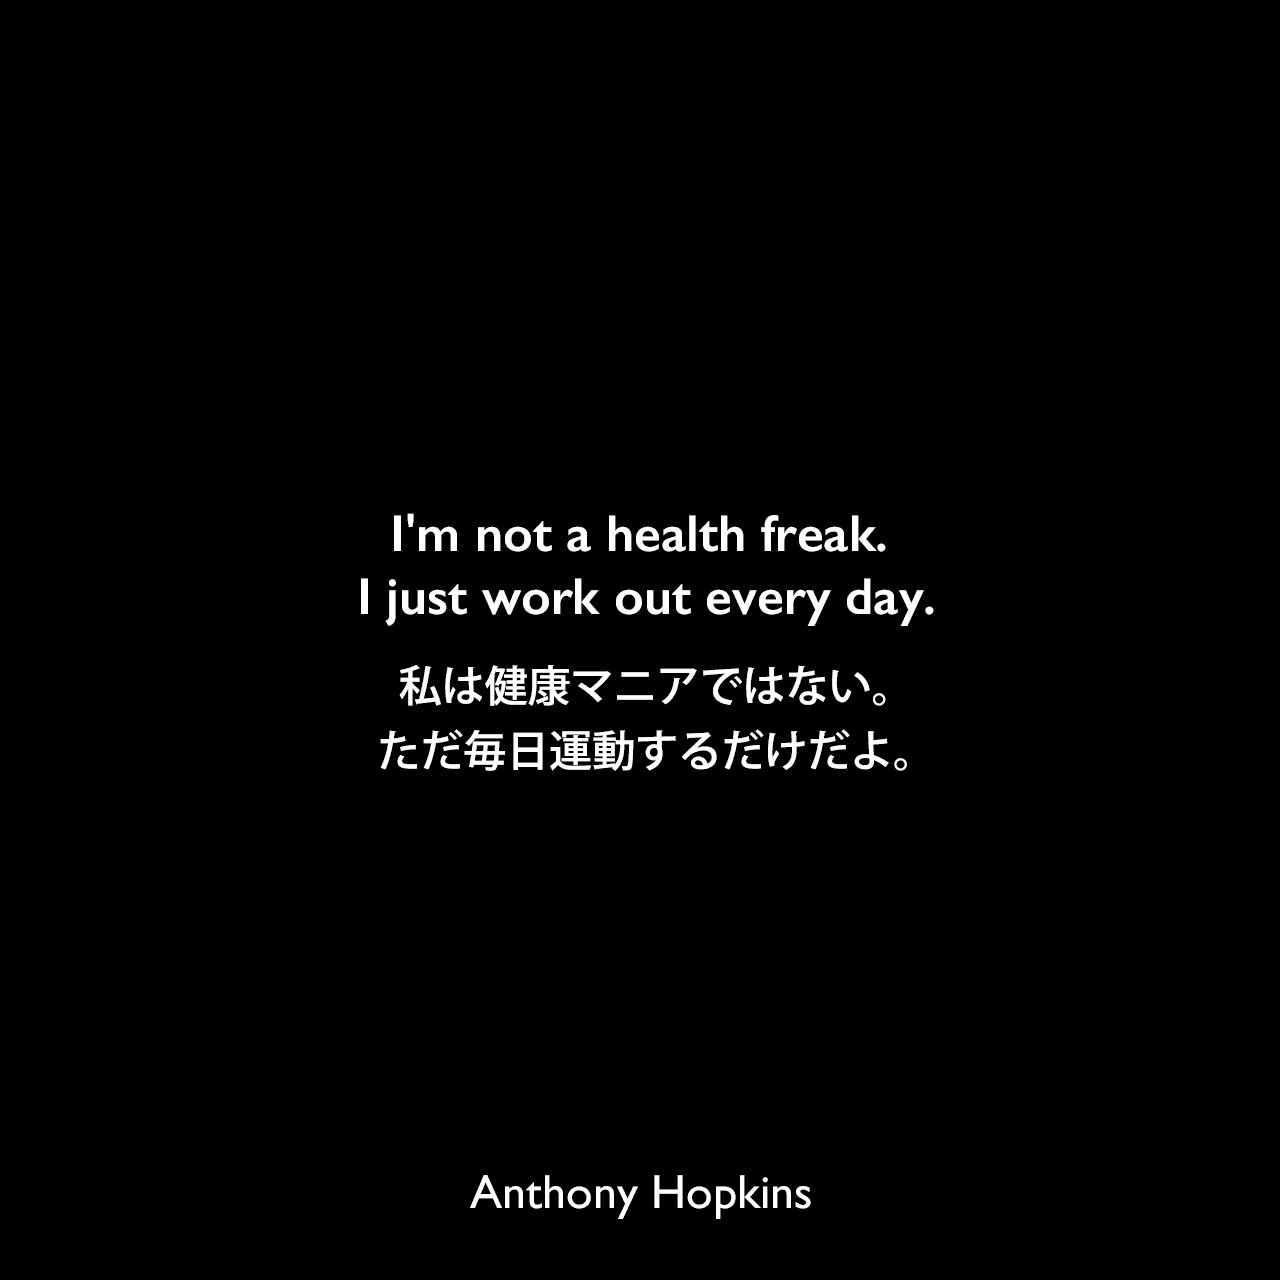 I'm not a health freak. I just work out every day.私は健康マニアではない。ただ毎日運動するだけだよ。Anthony Hopkins